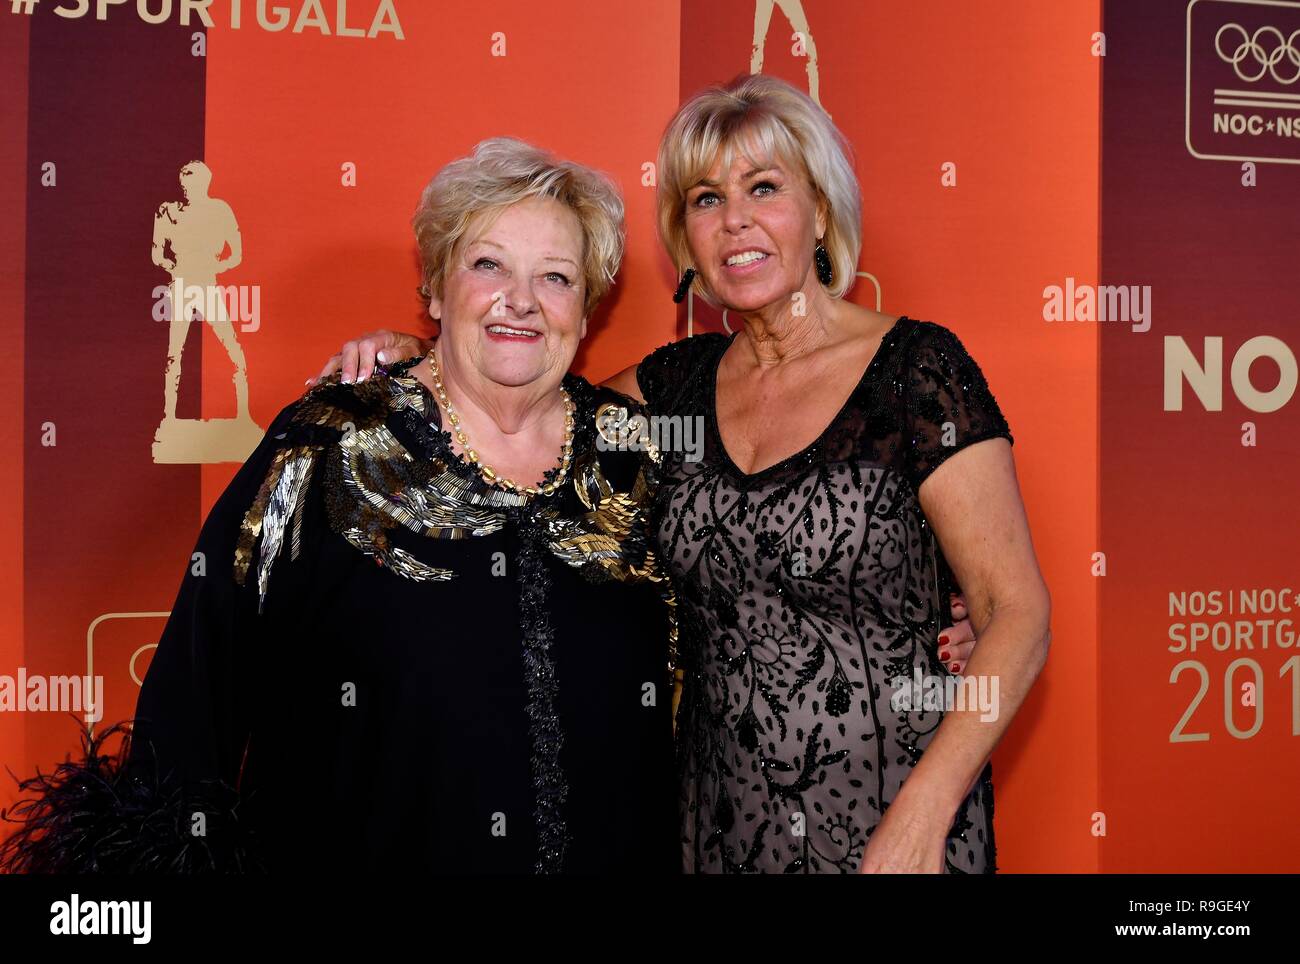 19-12-2018 NOC*NSF SPORTGALA: AMSTERDAM Erica Terpstra (born 26 May 1943) is a retired Dutch politician of the People's Party for Freedom and Democracy (VVD). She is a former swimmer by occupation, participated in the 1960 and 1964 Summer Olympics. Photo: SCS/Soenar Chamid/AFLO Stock Photo